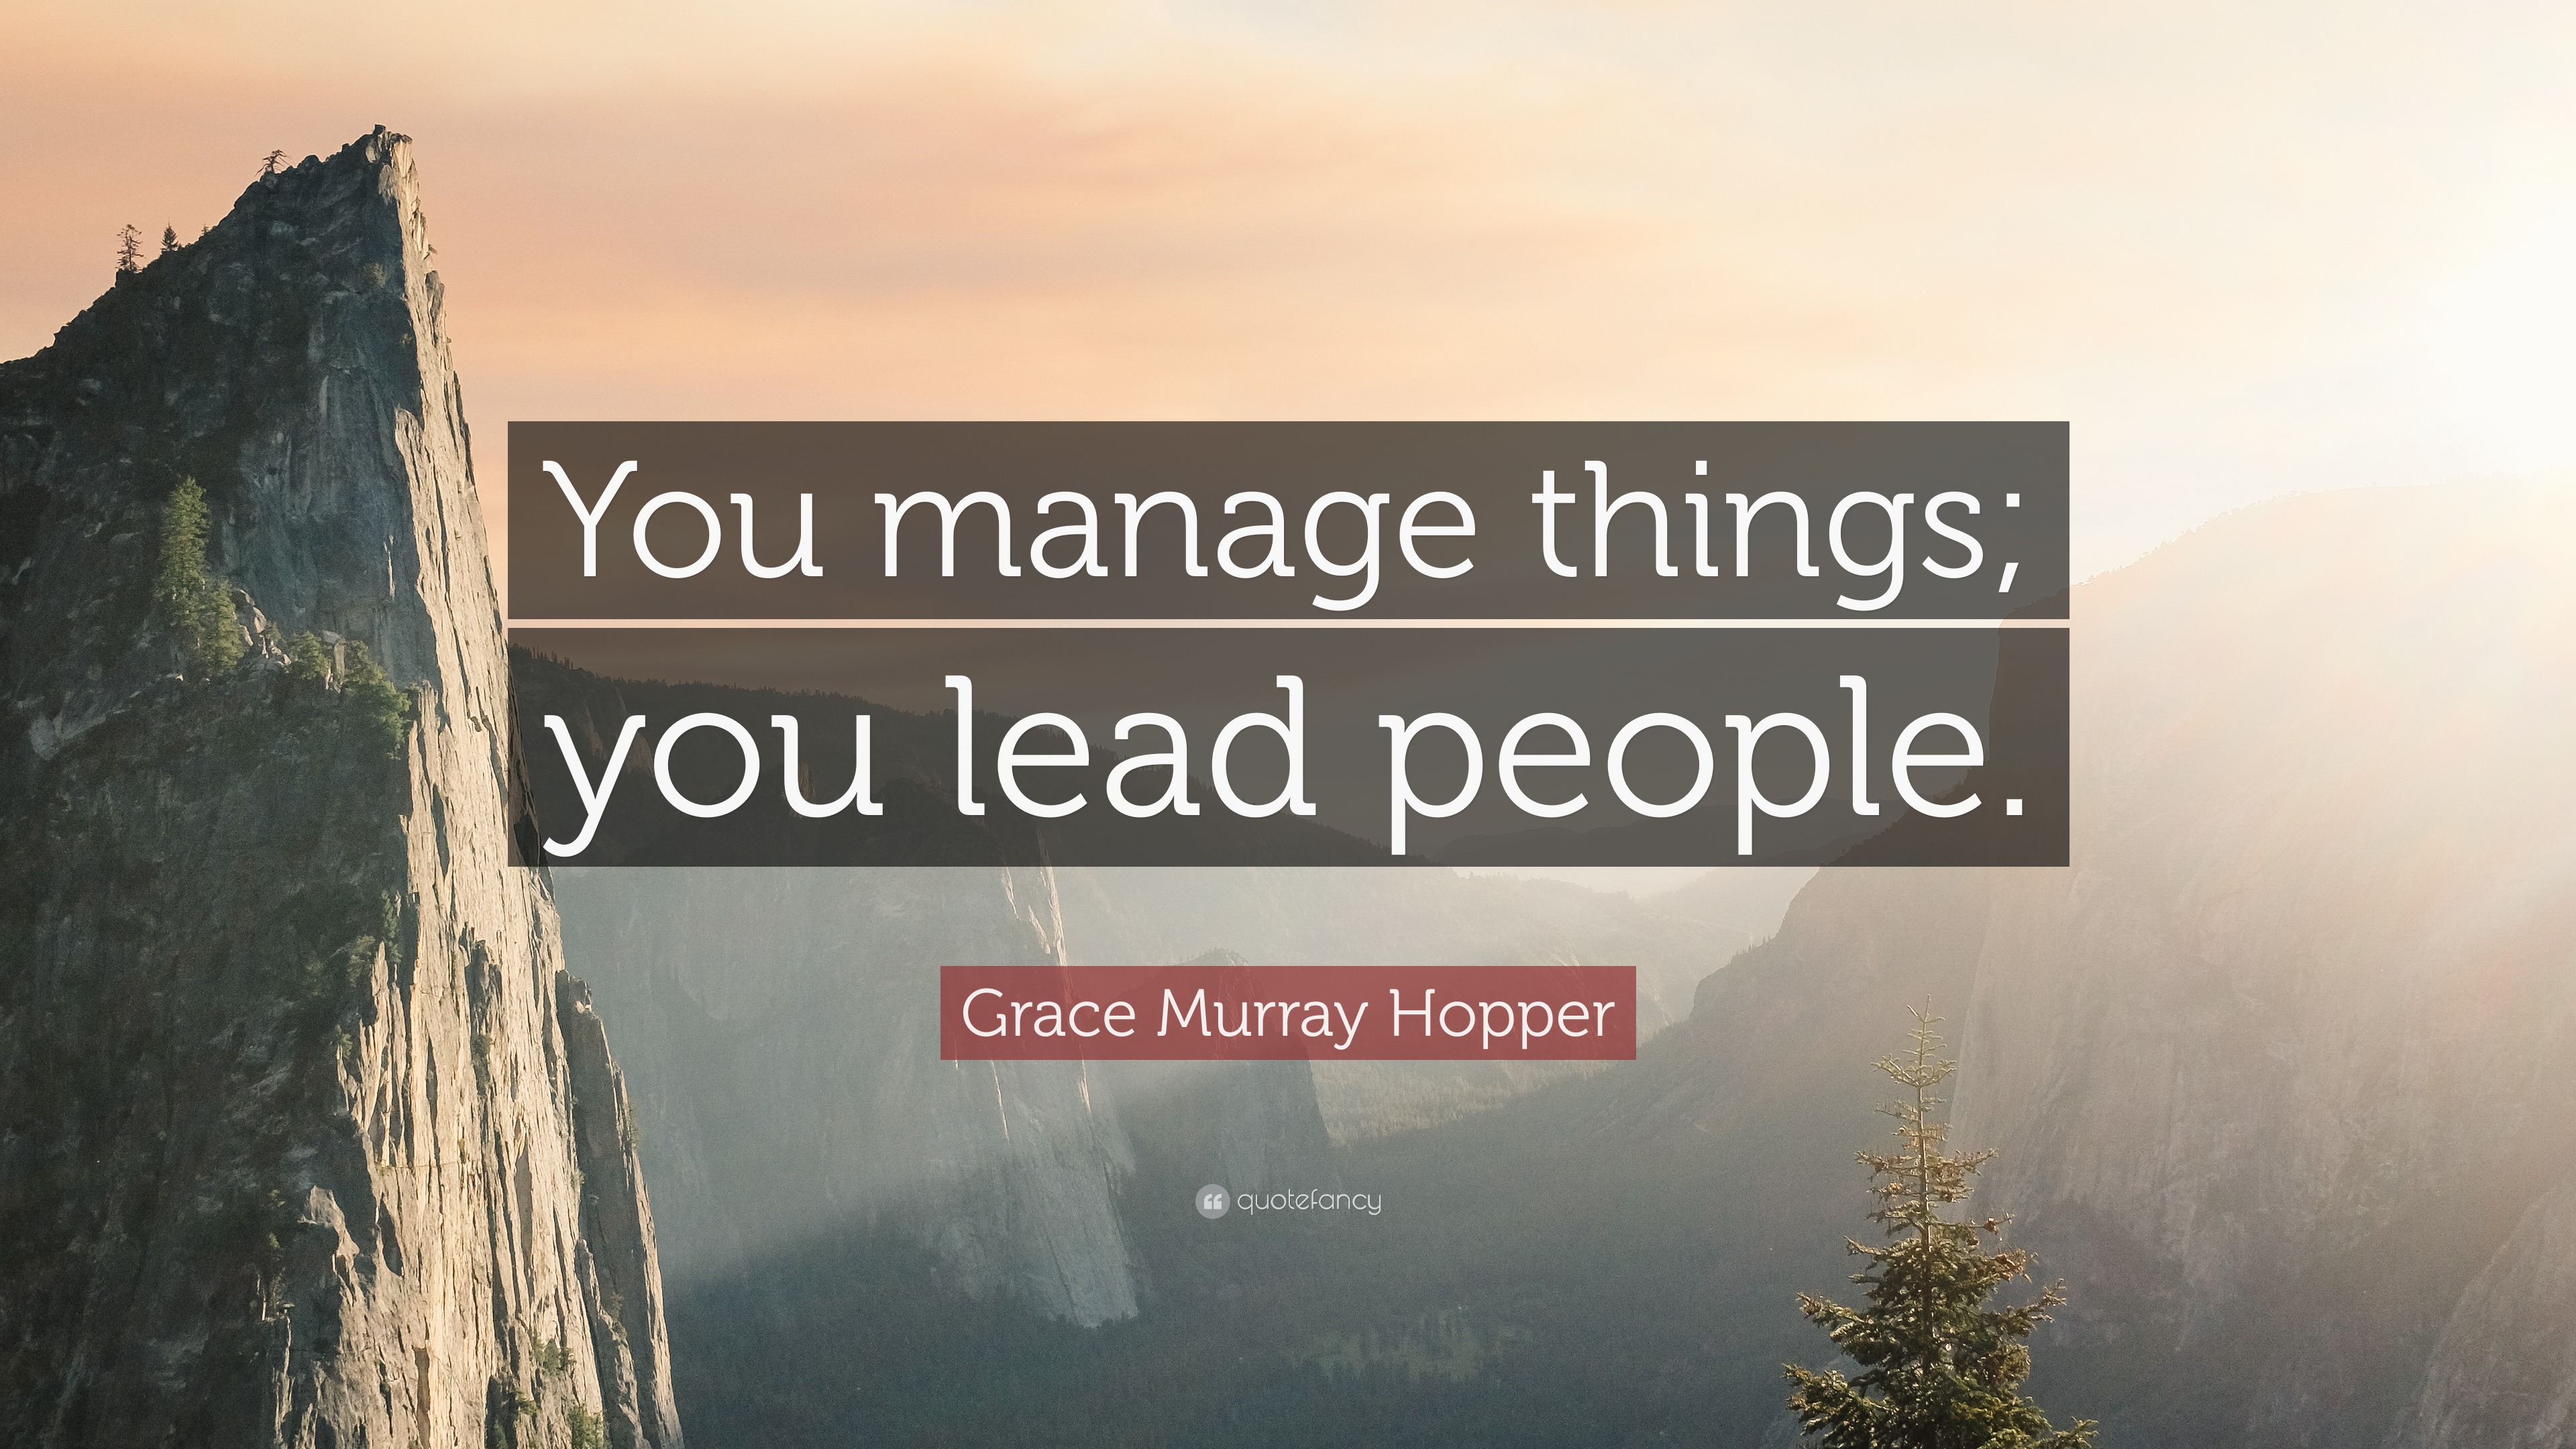 lead and manage people